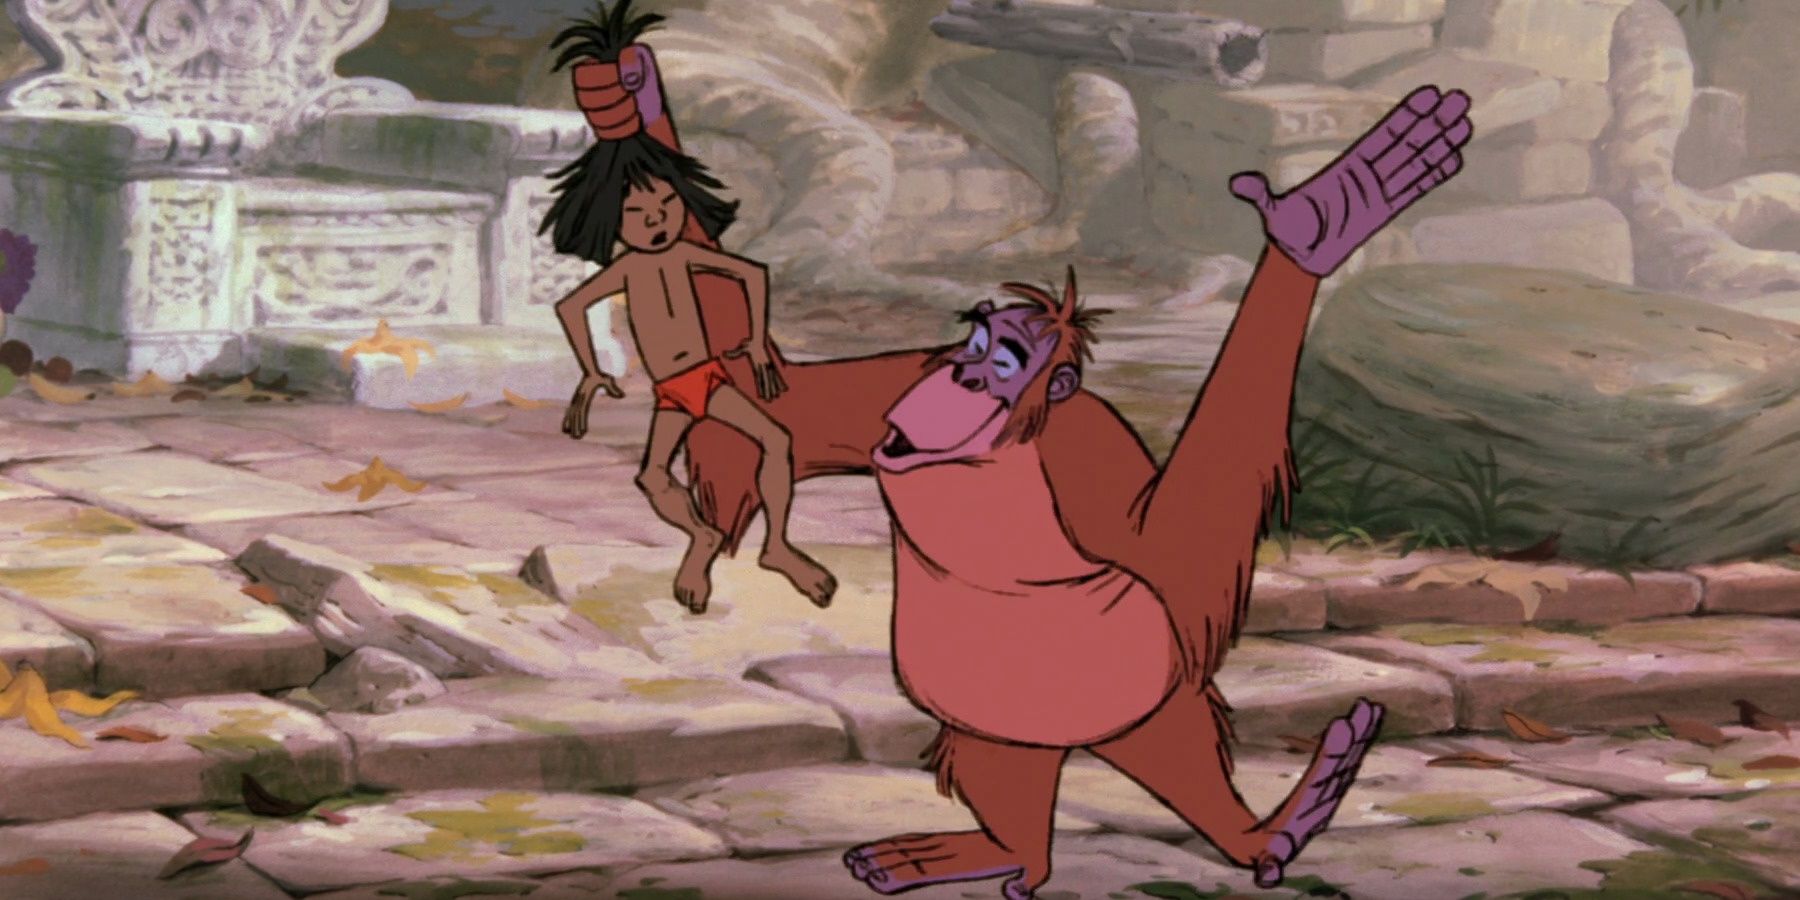 I Wnna Be Like You - King Louie and Mowgli dancing in The Jungle Book